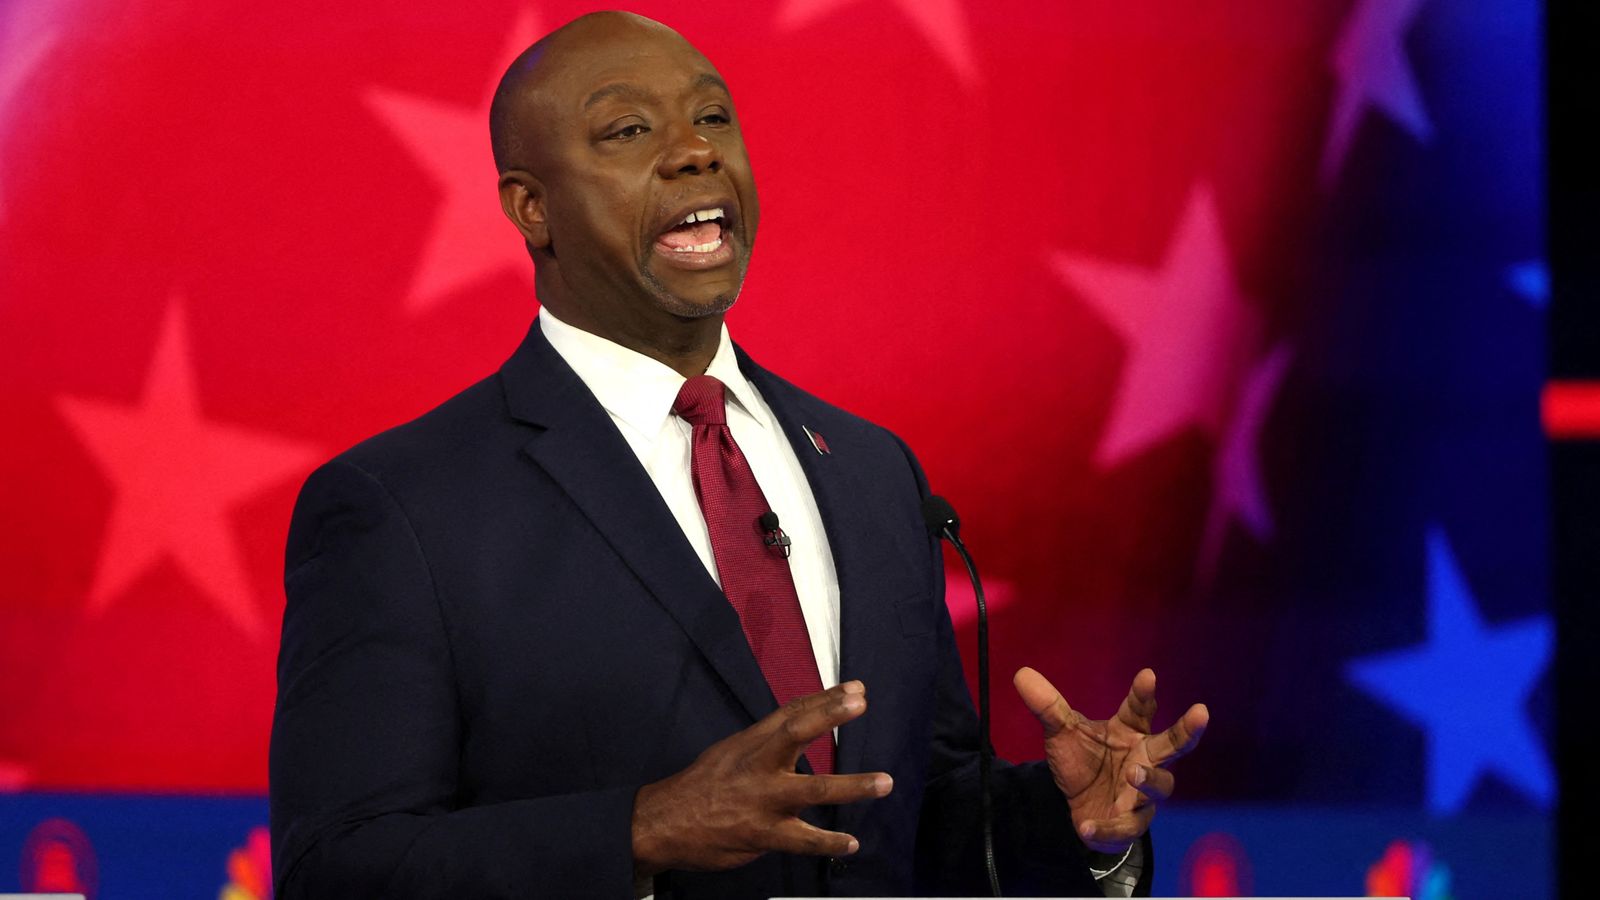 Republican presidential candidate Tim Scott drops out of 2024 race